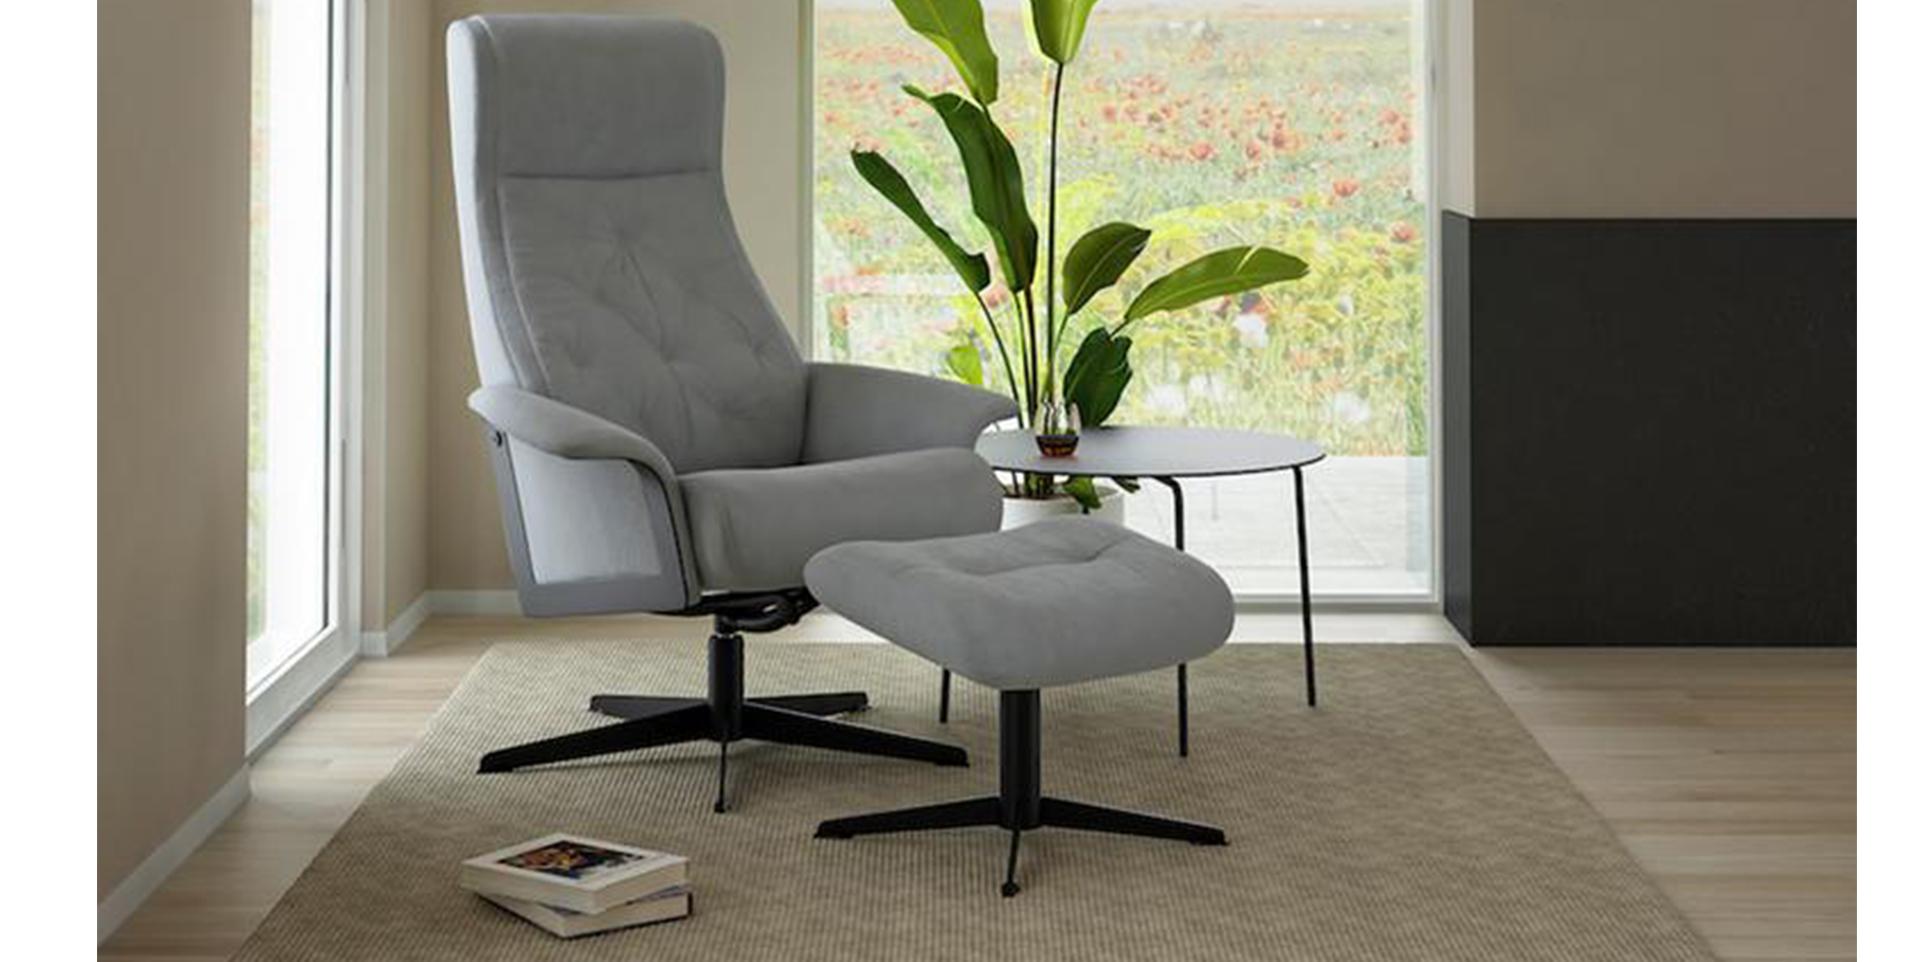 Fauteuil relax cuir blanc